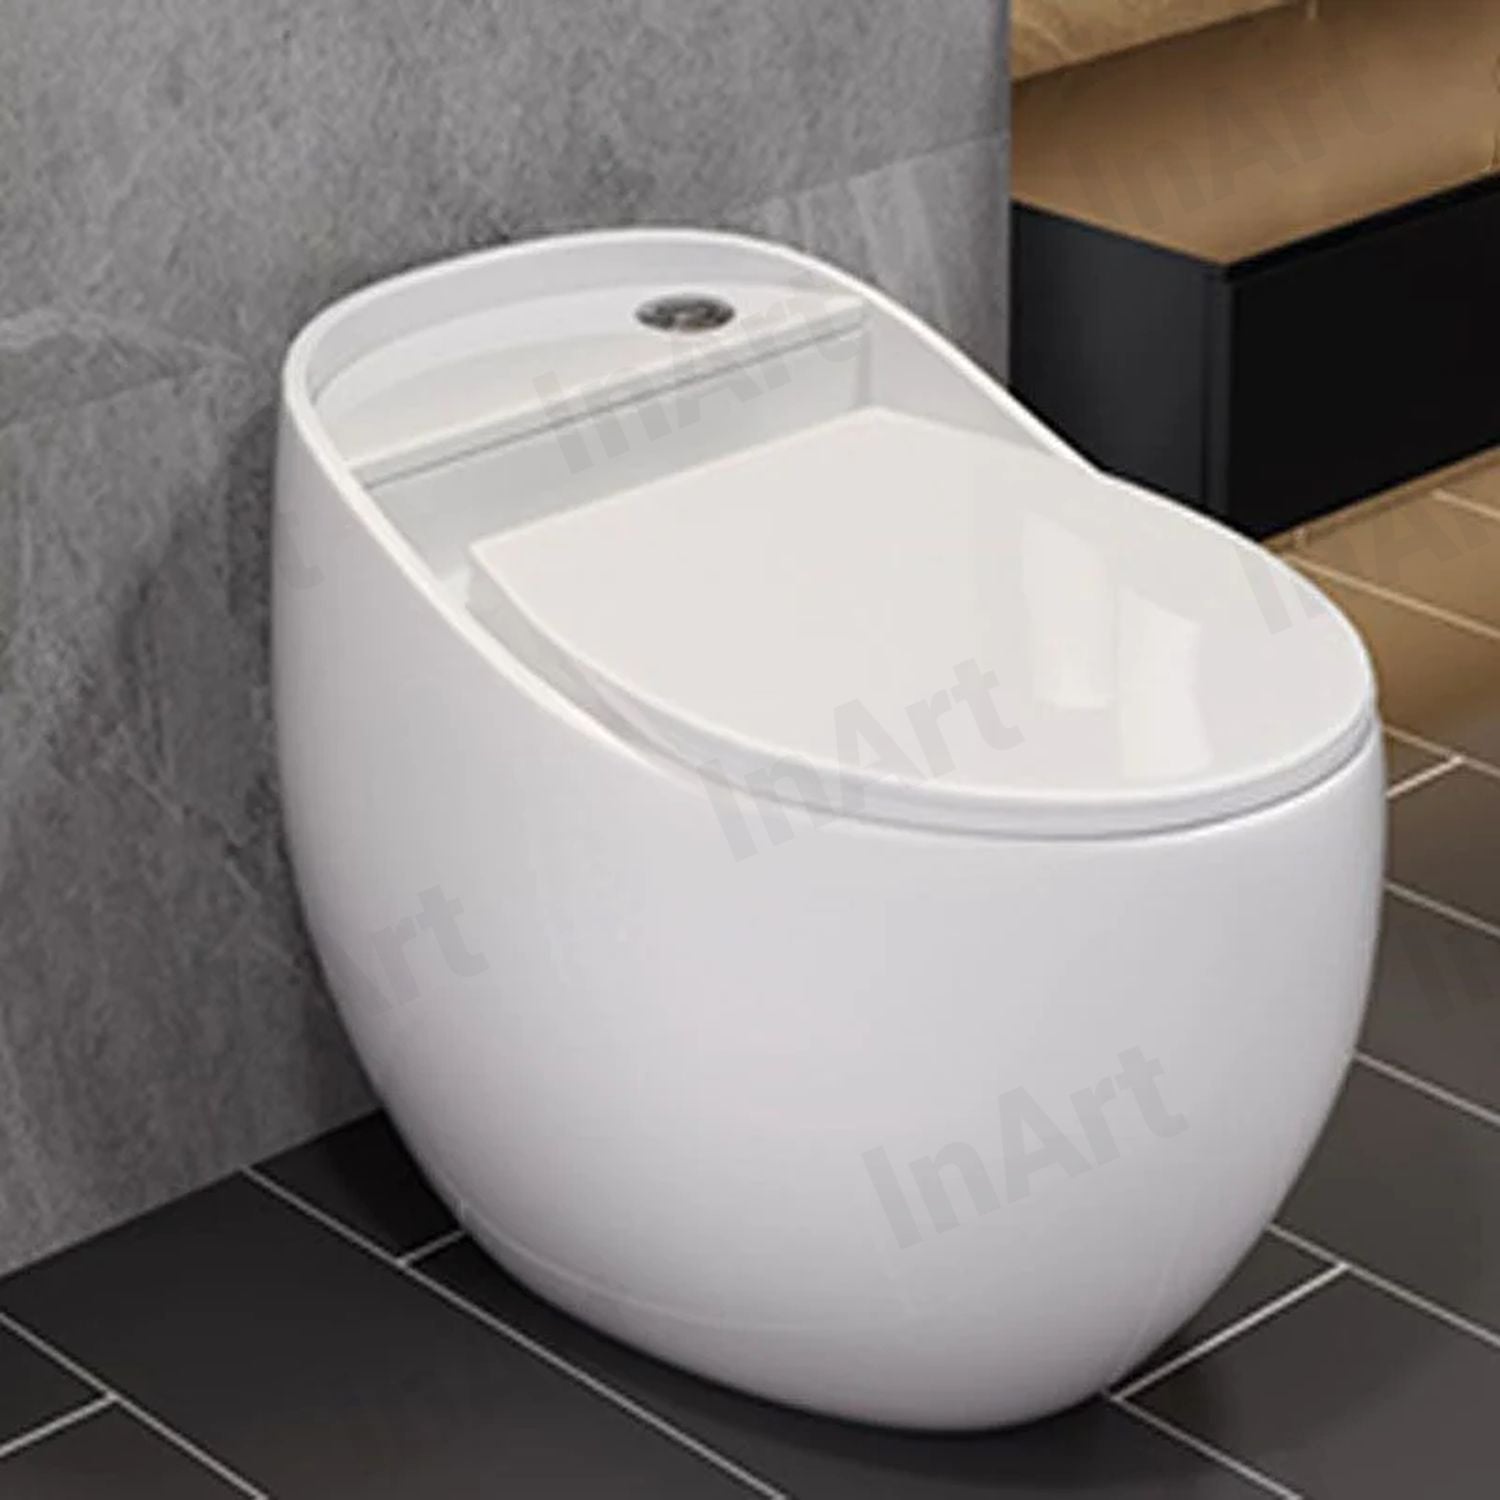 InArt Designer Ceramic Western Toilet - White, One-Piece with Soft Close Seat, Floor Mounted - InArt-Studio